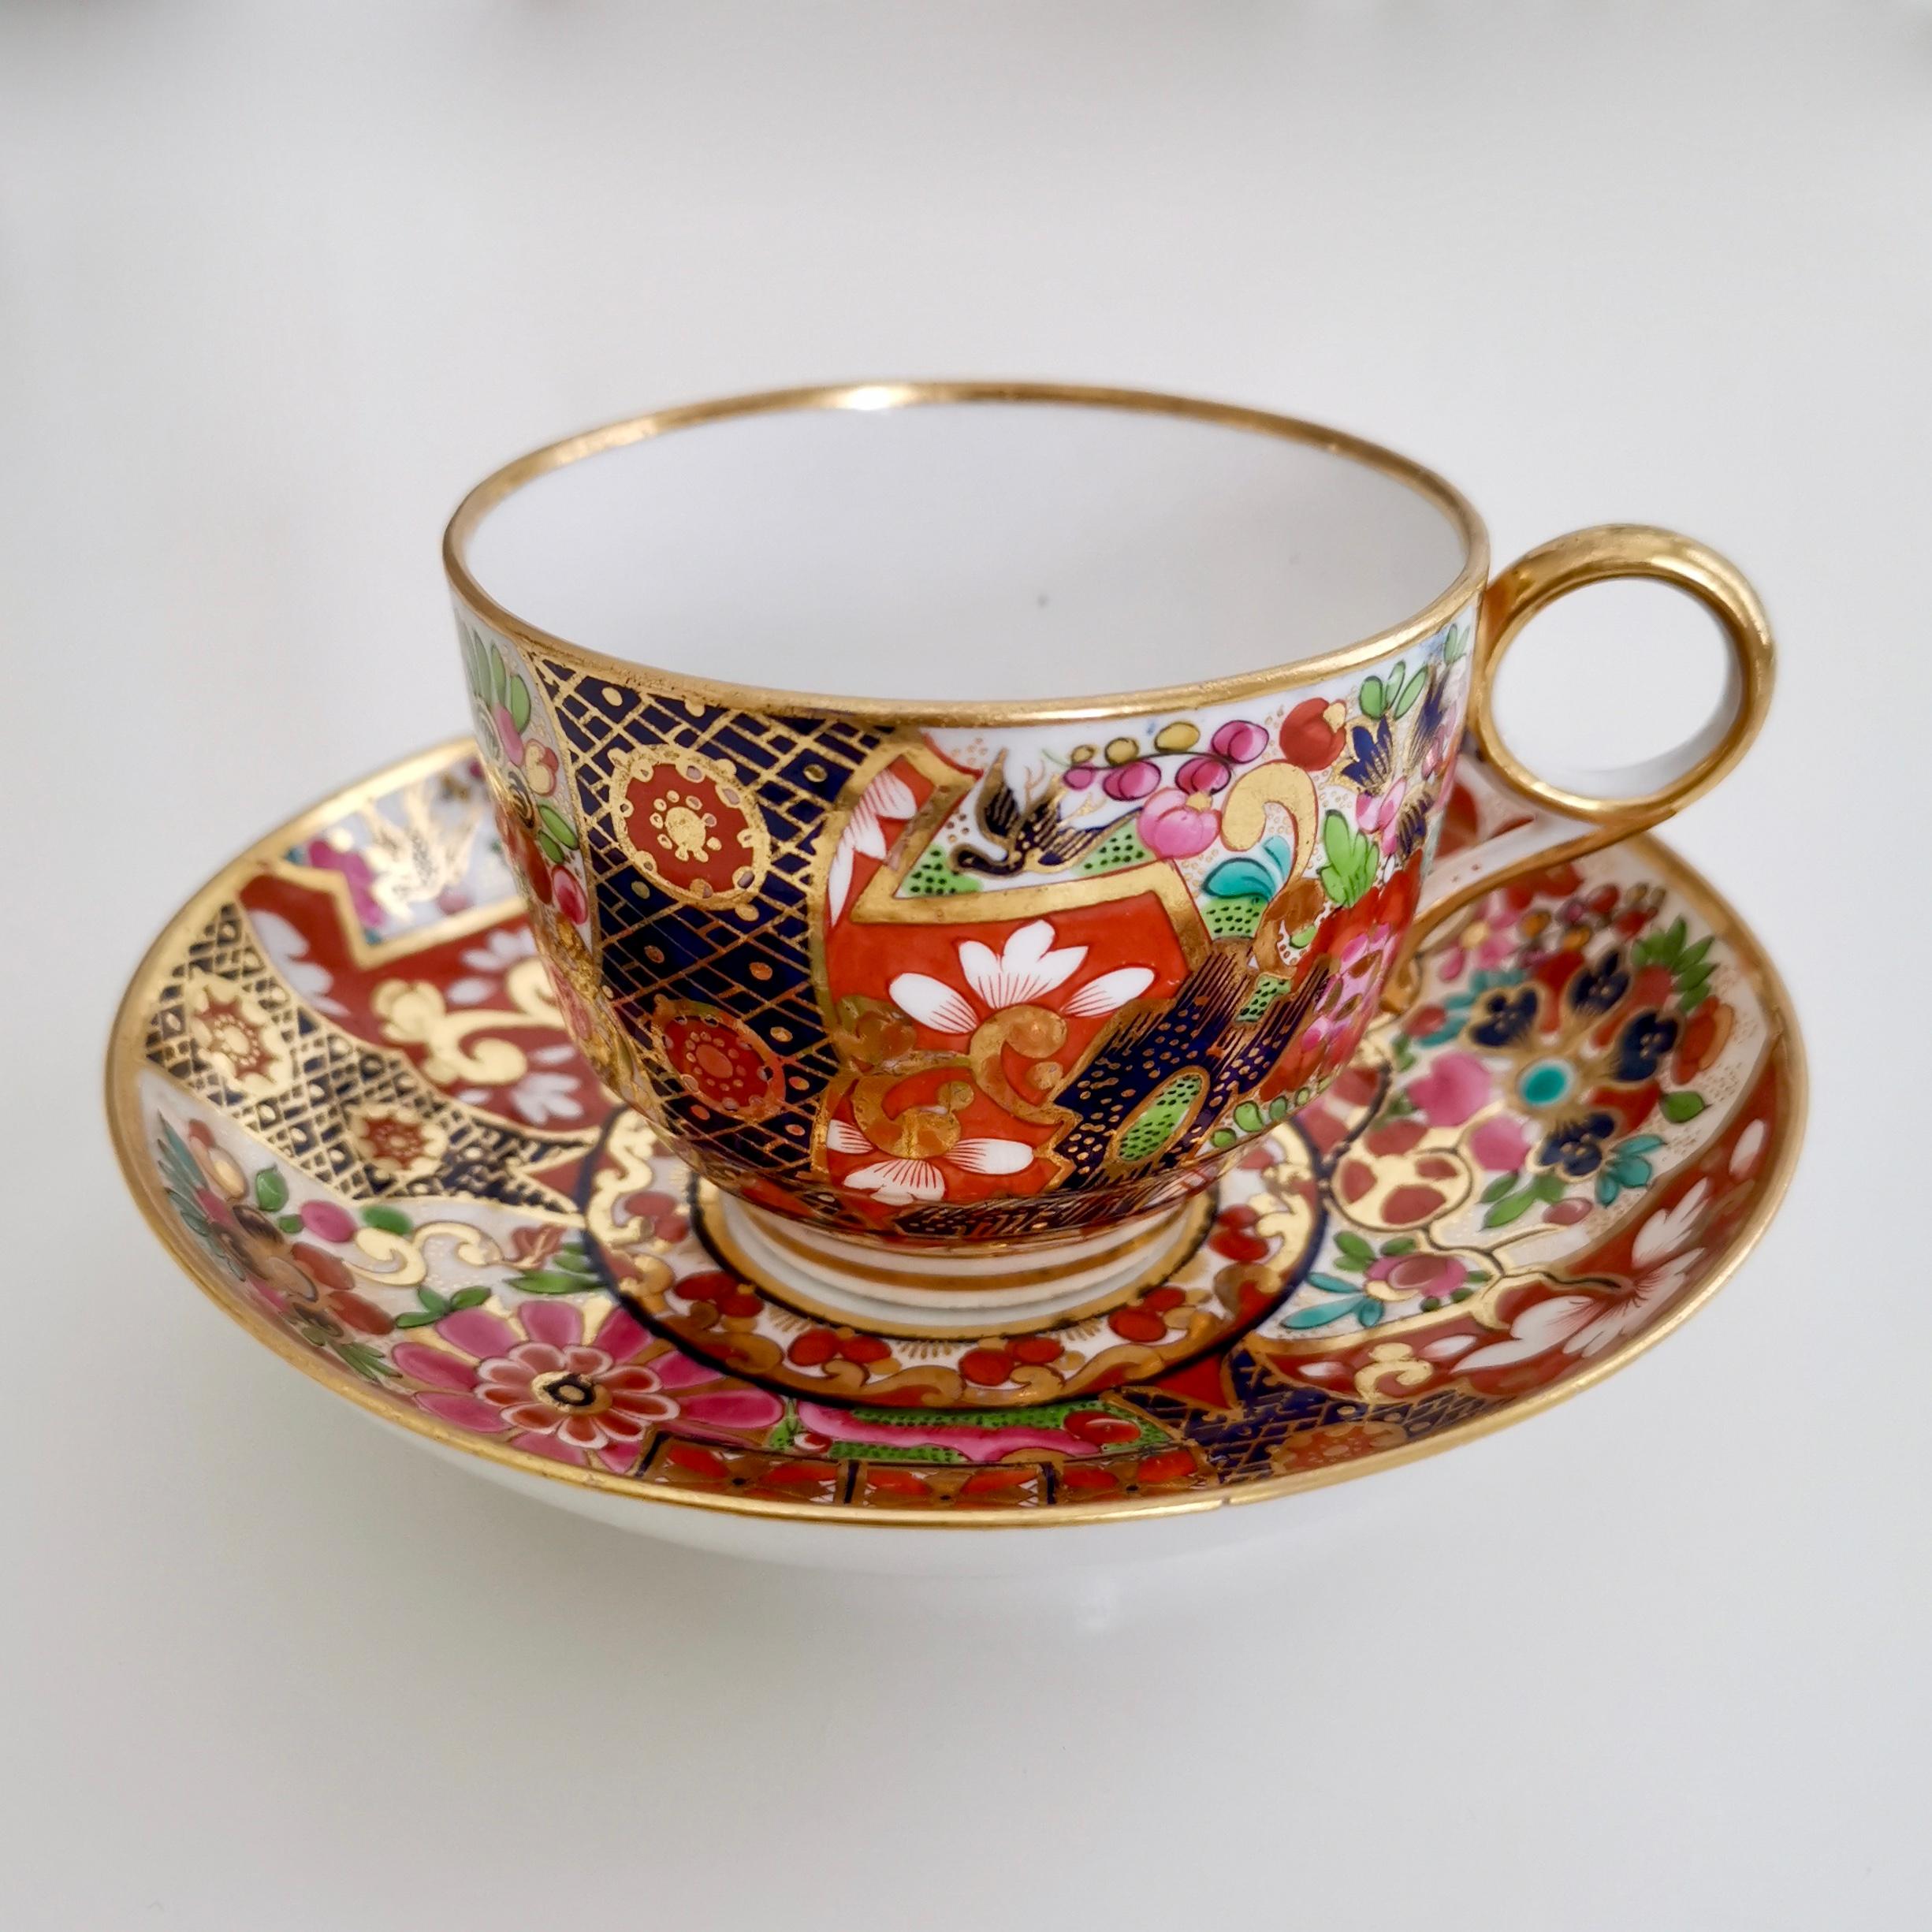 This is a spectacular teacup and saucer made by Barr Flight & Barr between 1811 and 1813. It is made in the bute shape and has what is often called the 